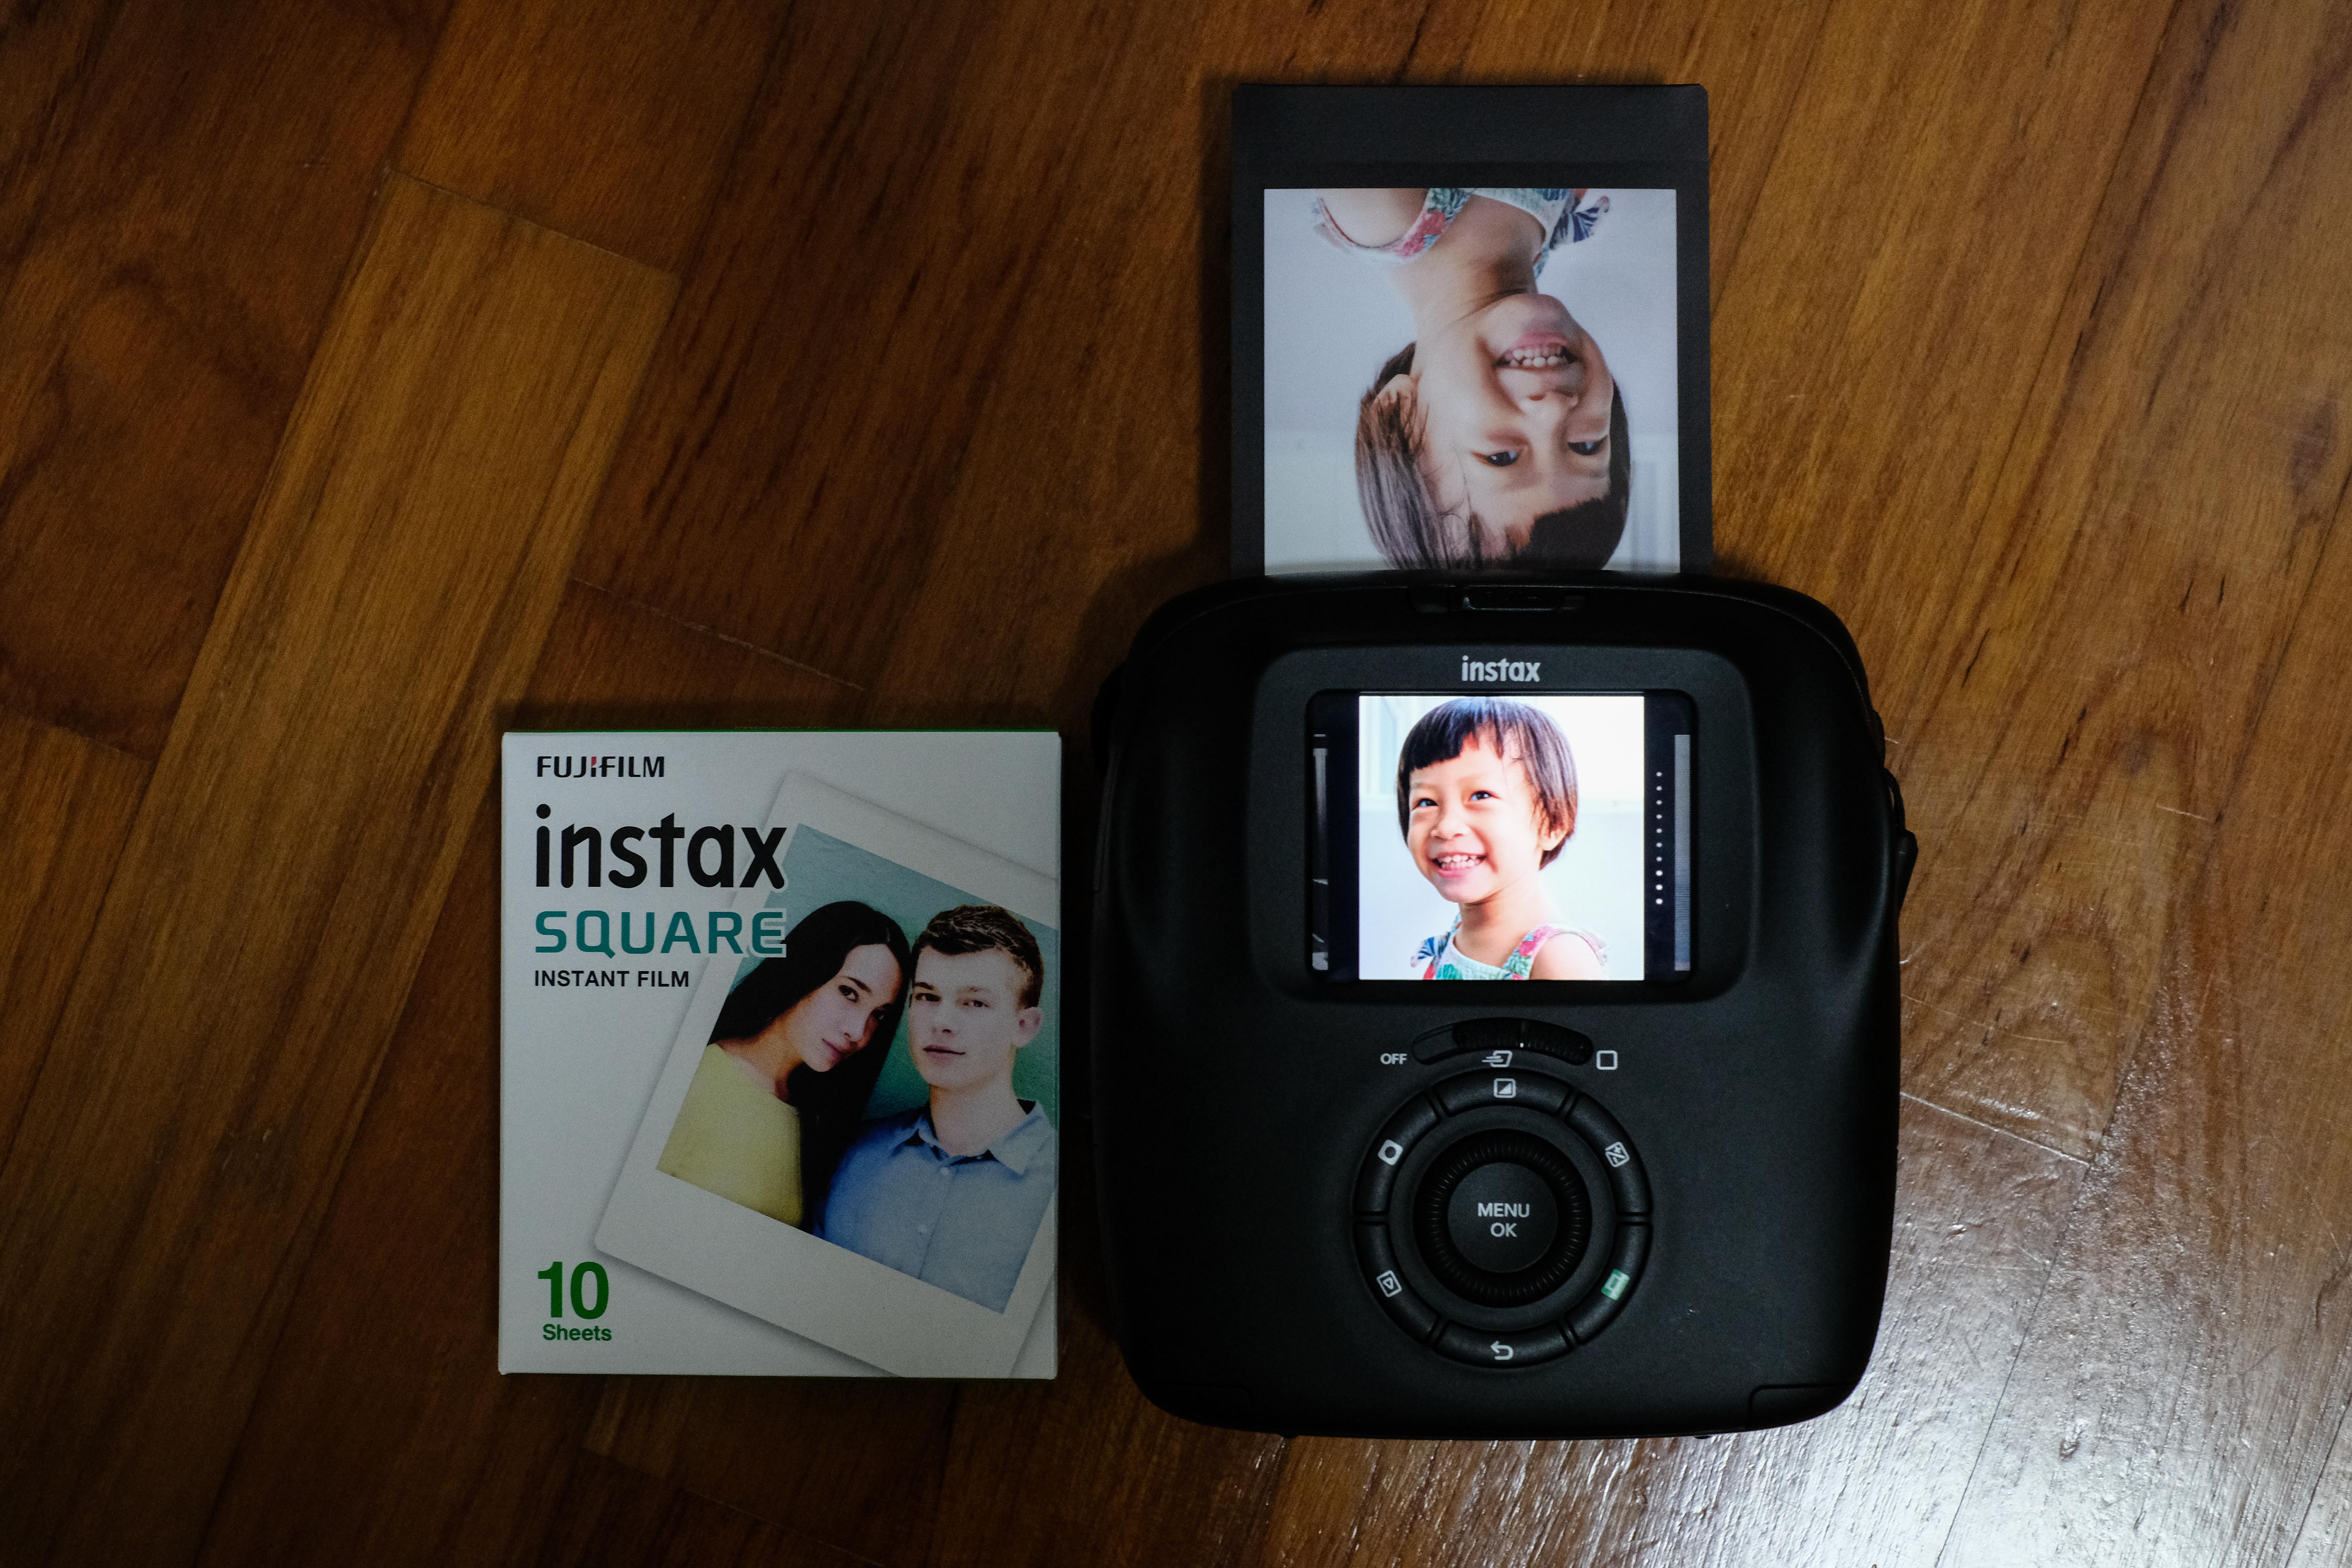 The most informative review of the Fujifilm Instax SQ20: Fun now